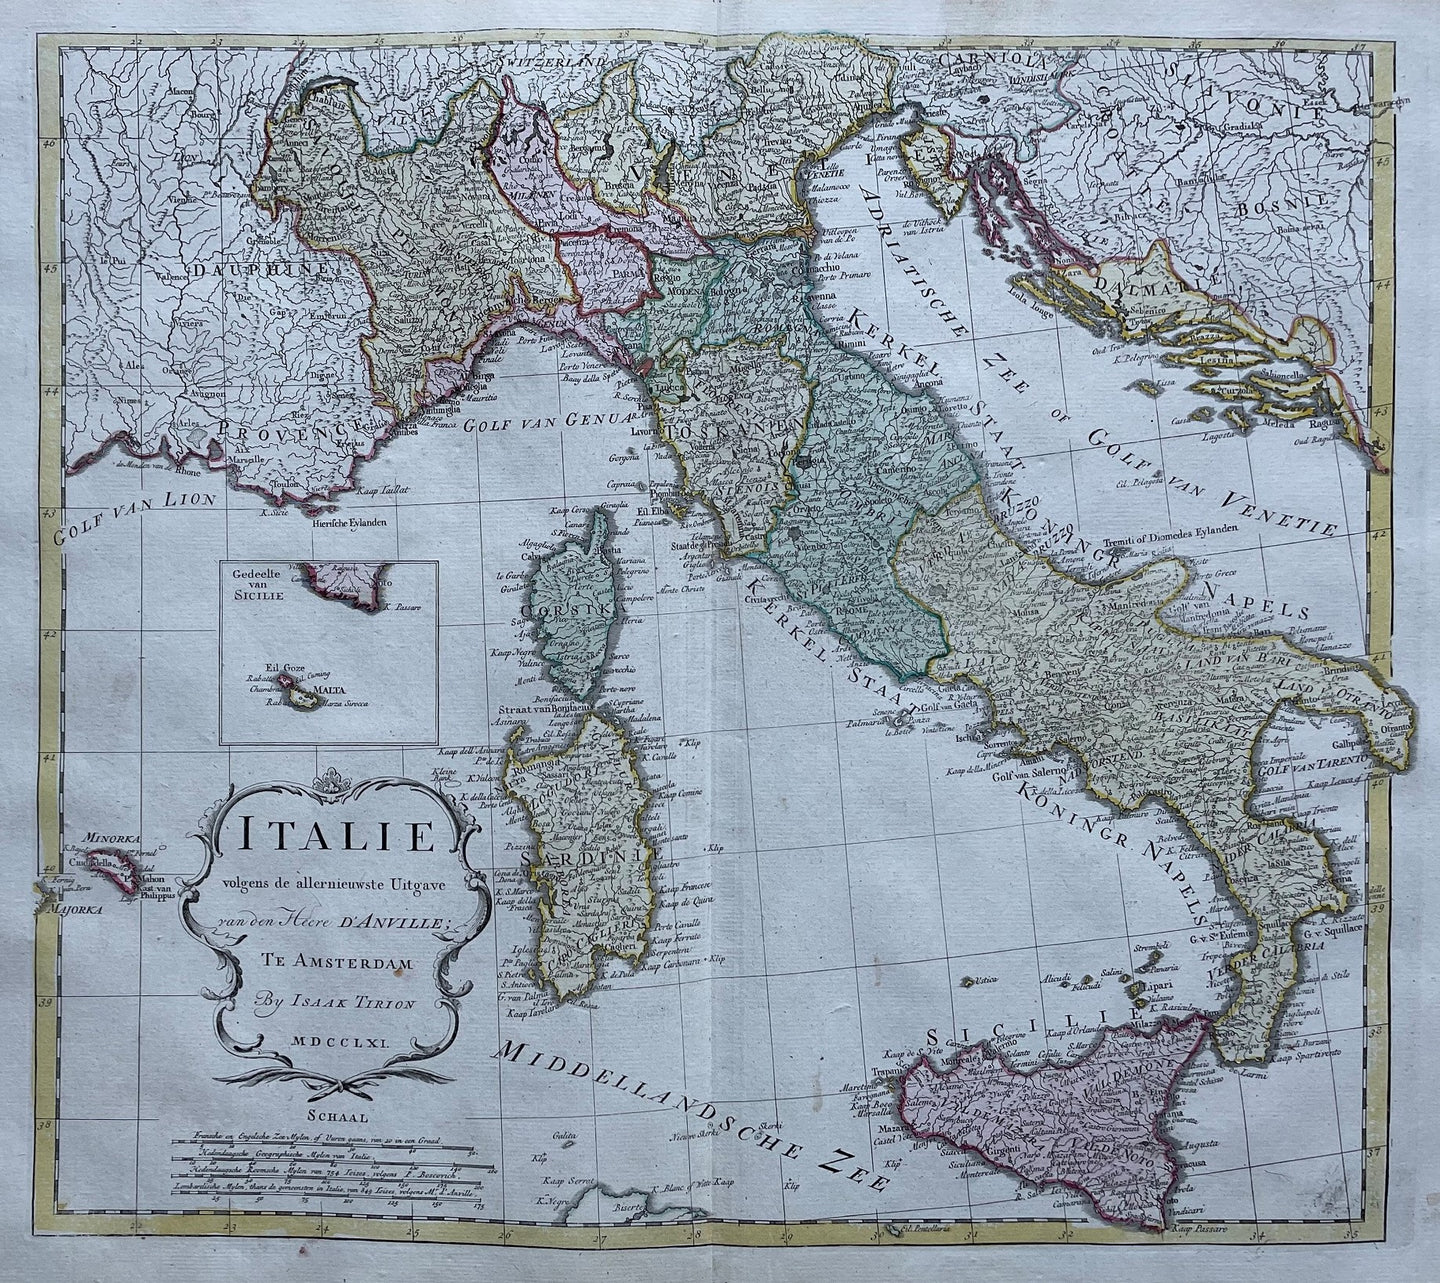 Italië Italy - d'Anville / Tirion - 1764